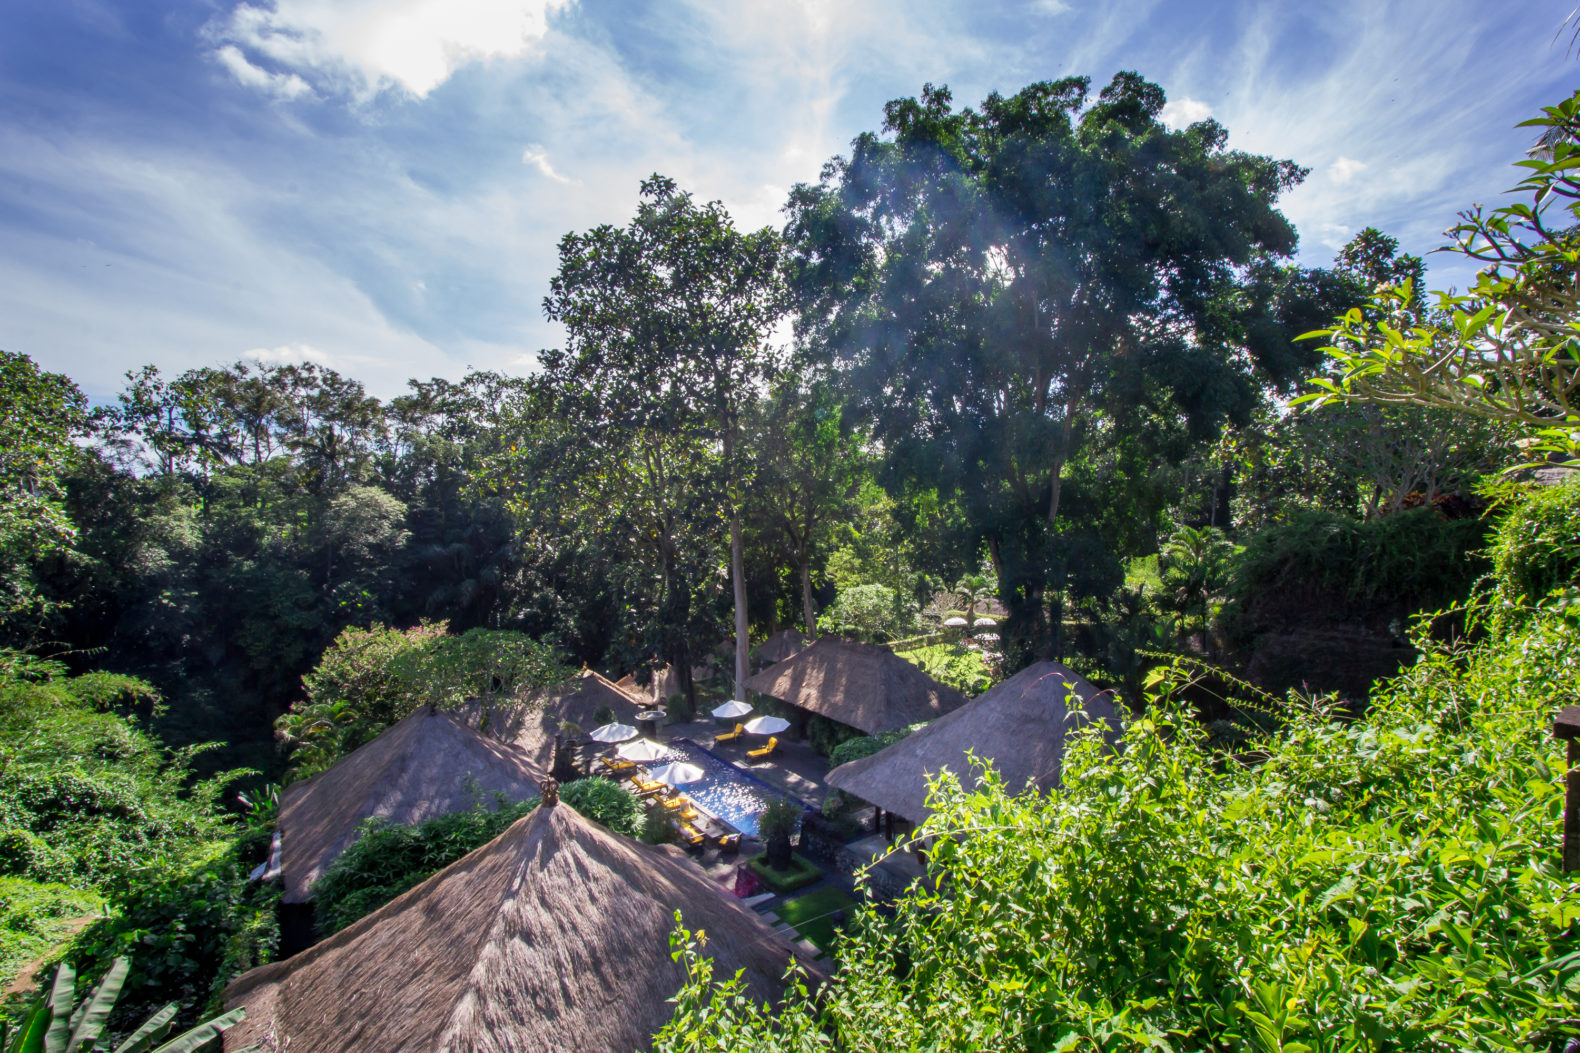 view-of-estate-how-it-looks-forest-bathing-palm-trees-healing-sukhavati-hotel-retreat-bali-asia